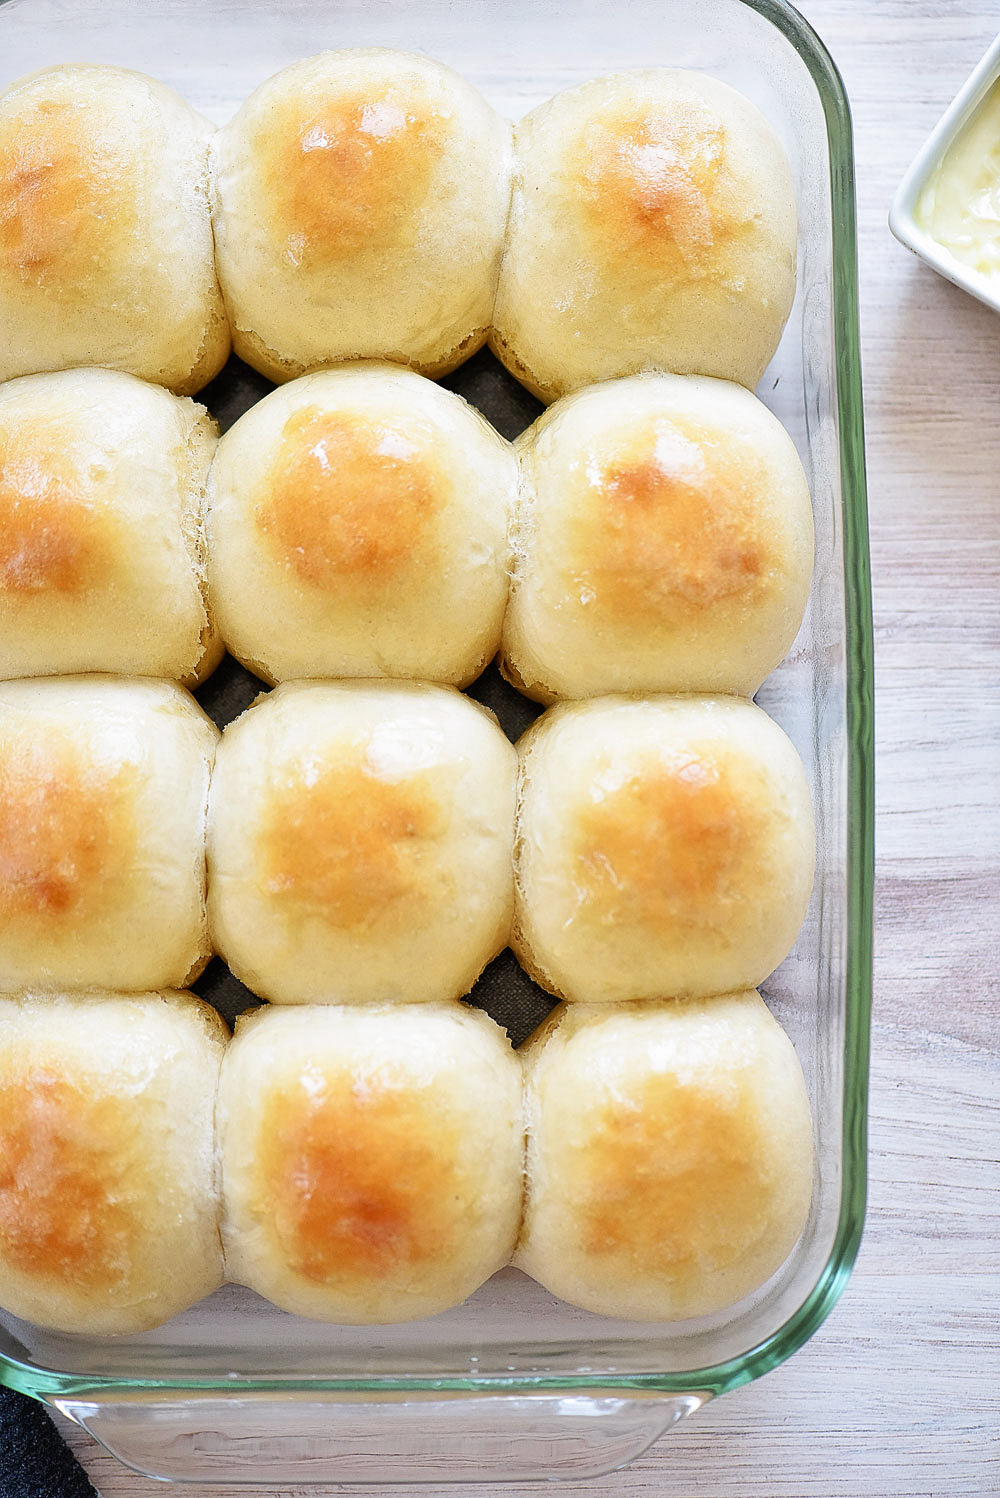 French bread rolls are soft and delicious homemade rolls. Life-in-the-Lofthouse.com